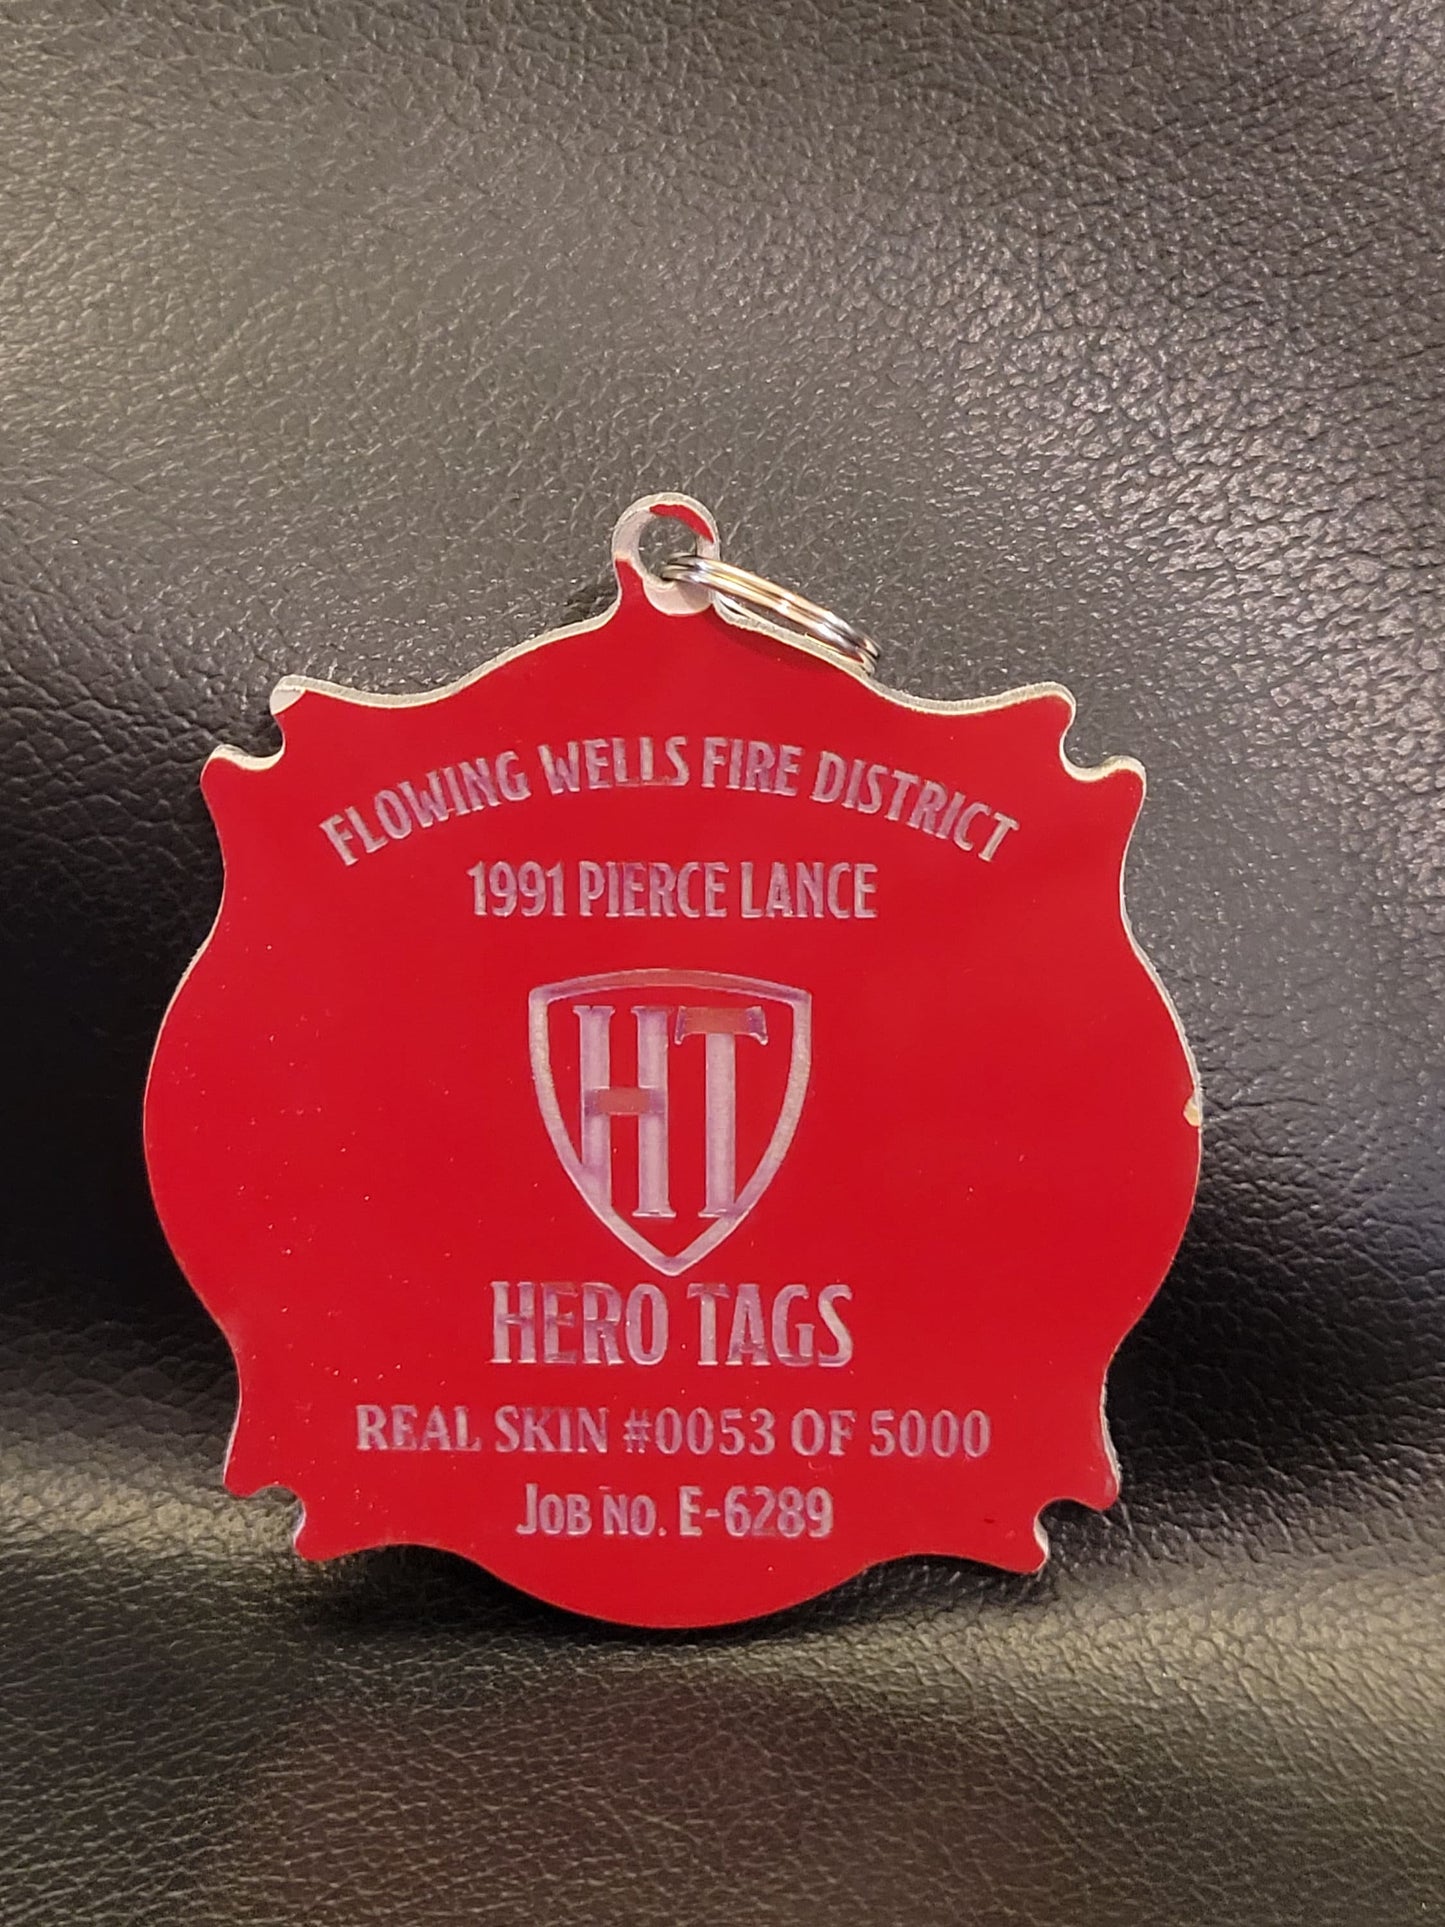 Hero tags real skin from a real fire truck "RED Aluminum" Tag